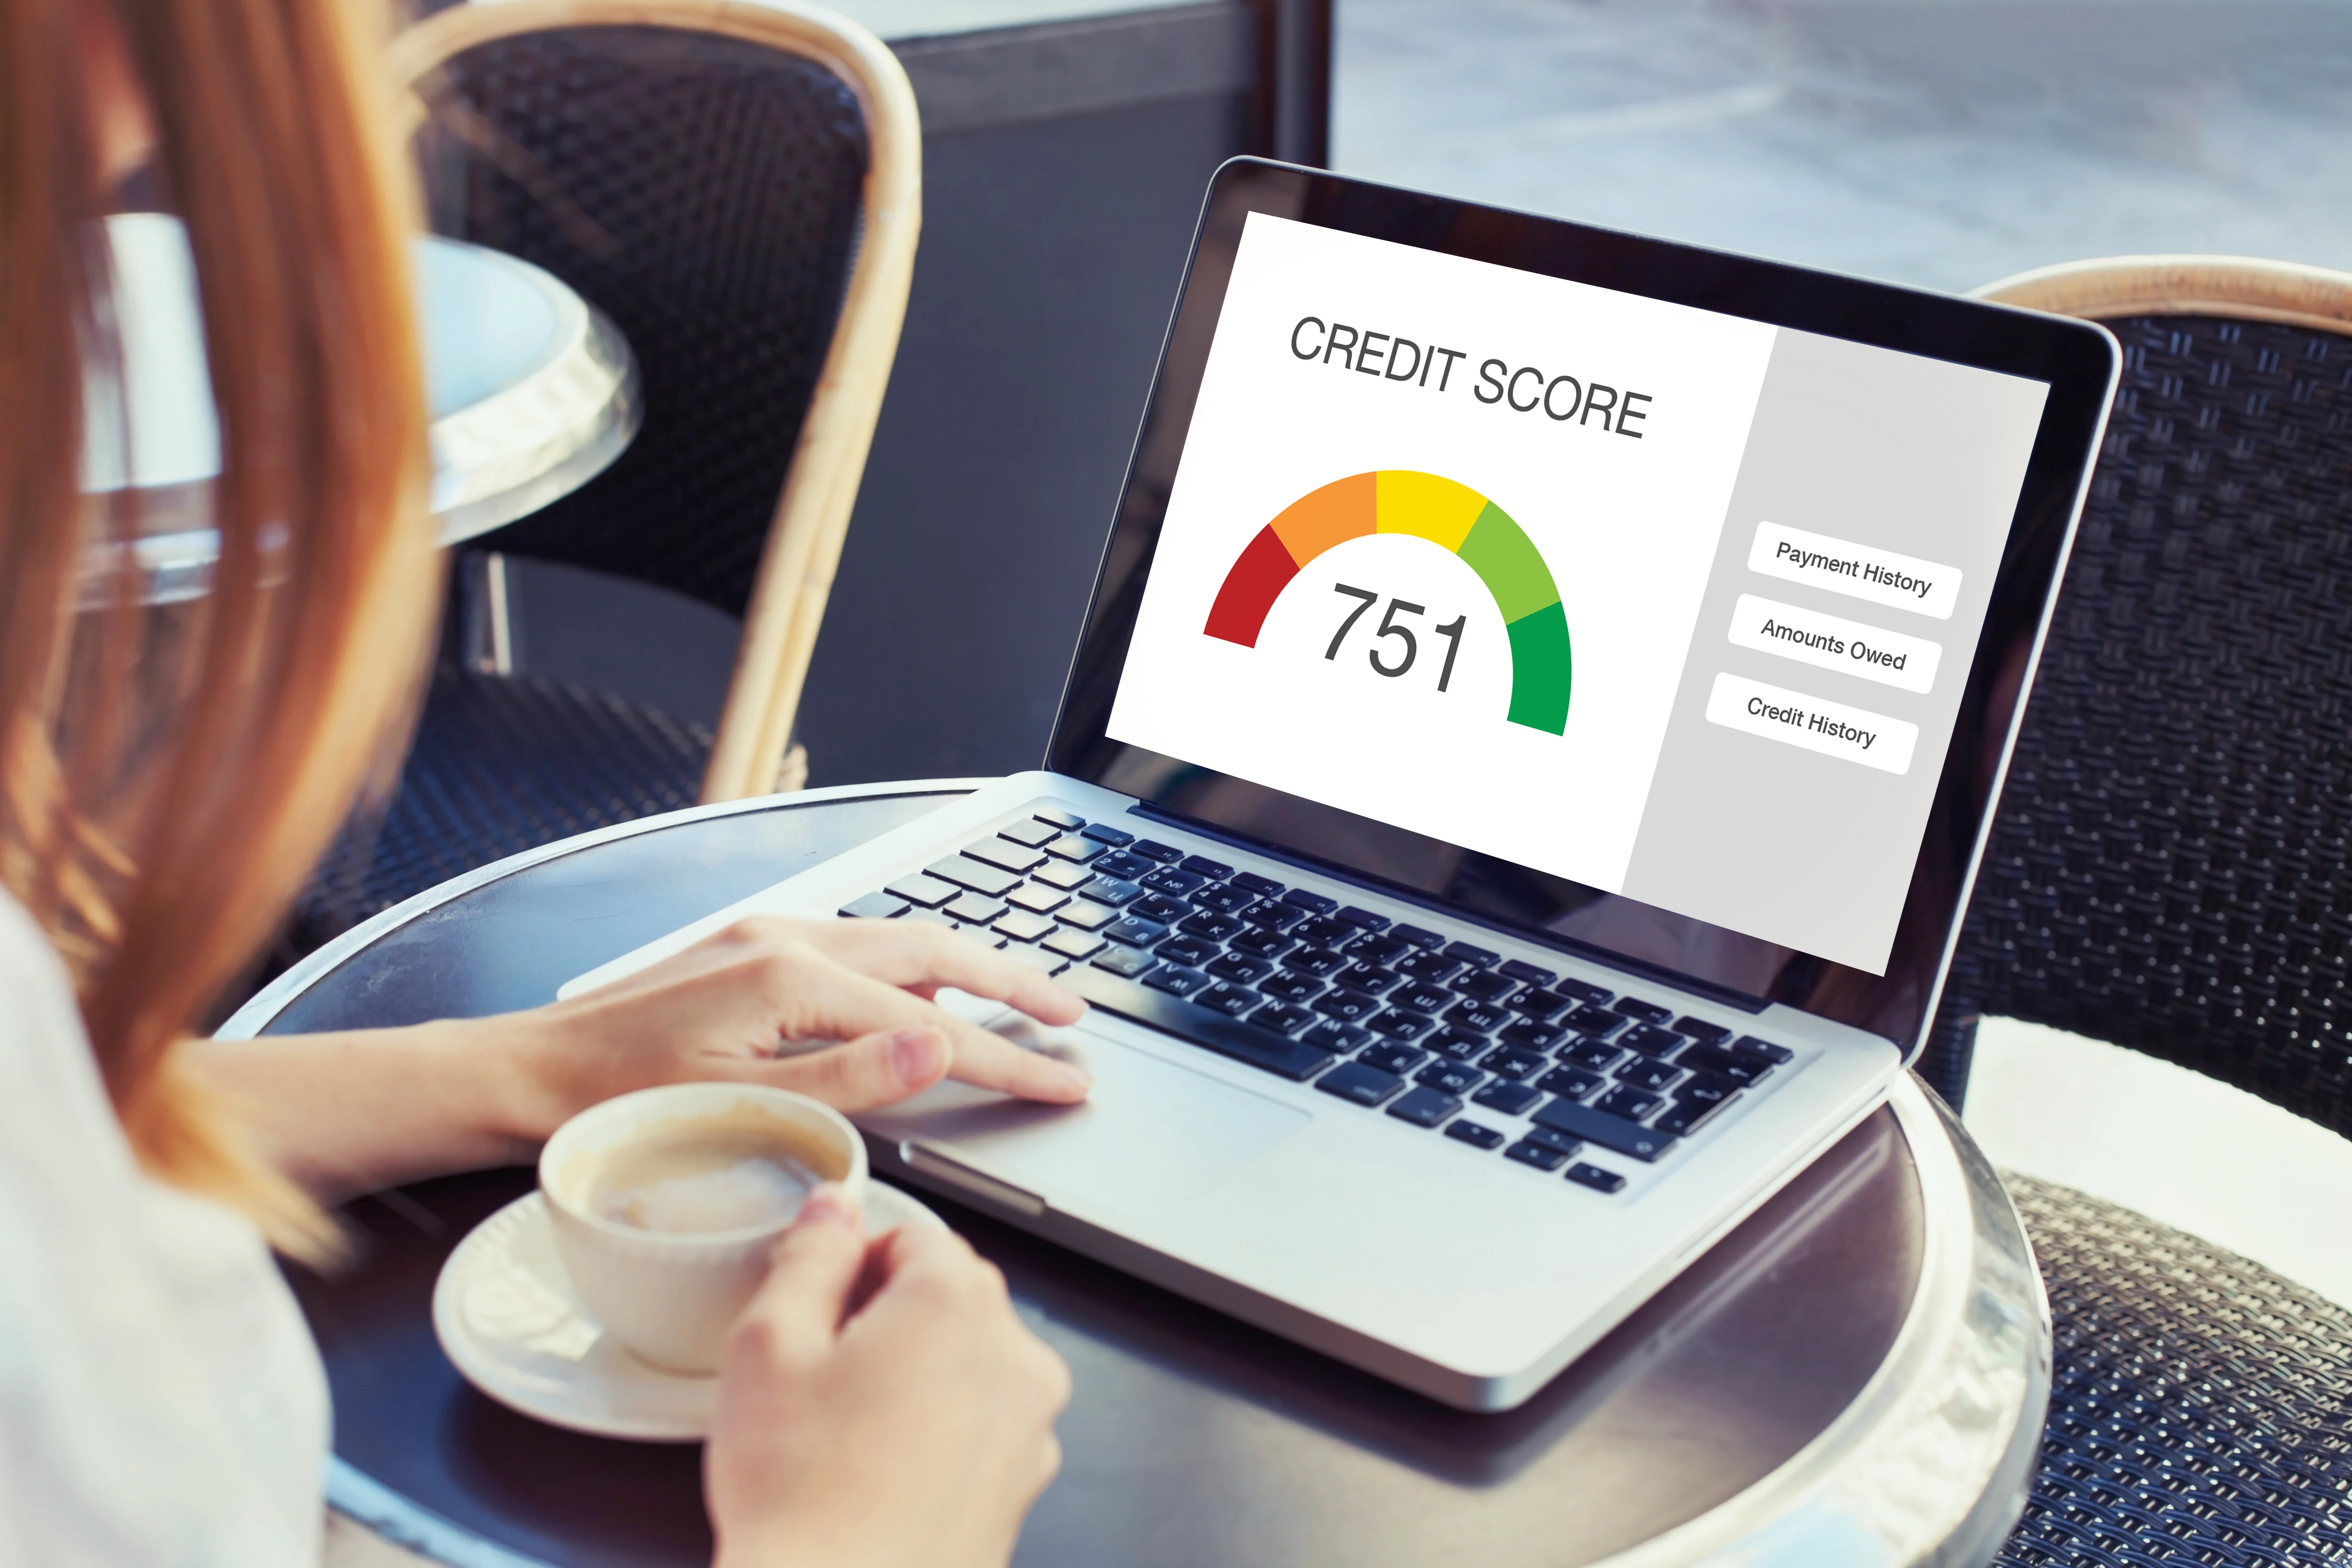 Learn what the best cards for good credit are. Source: Adobe Stock.